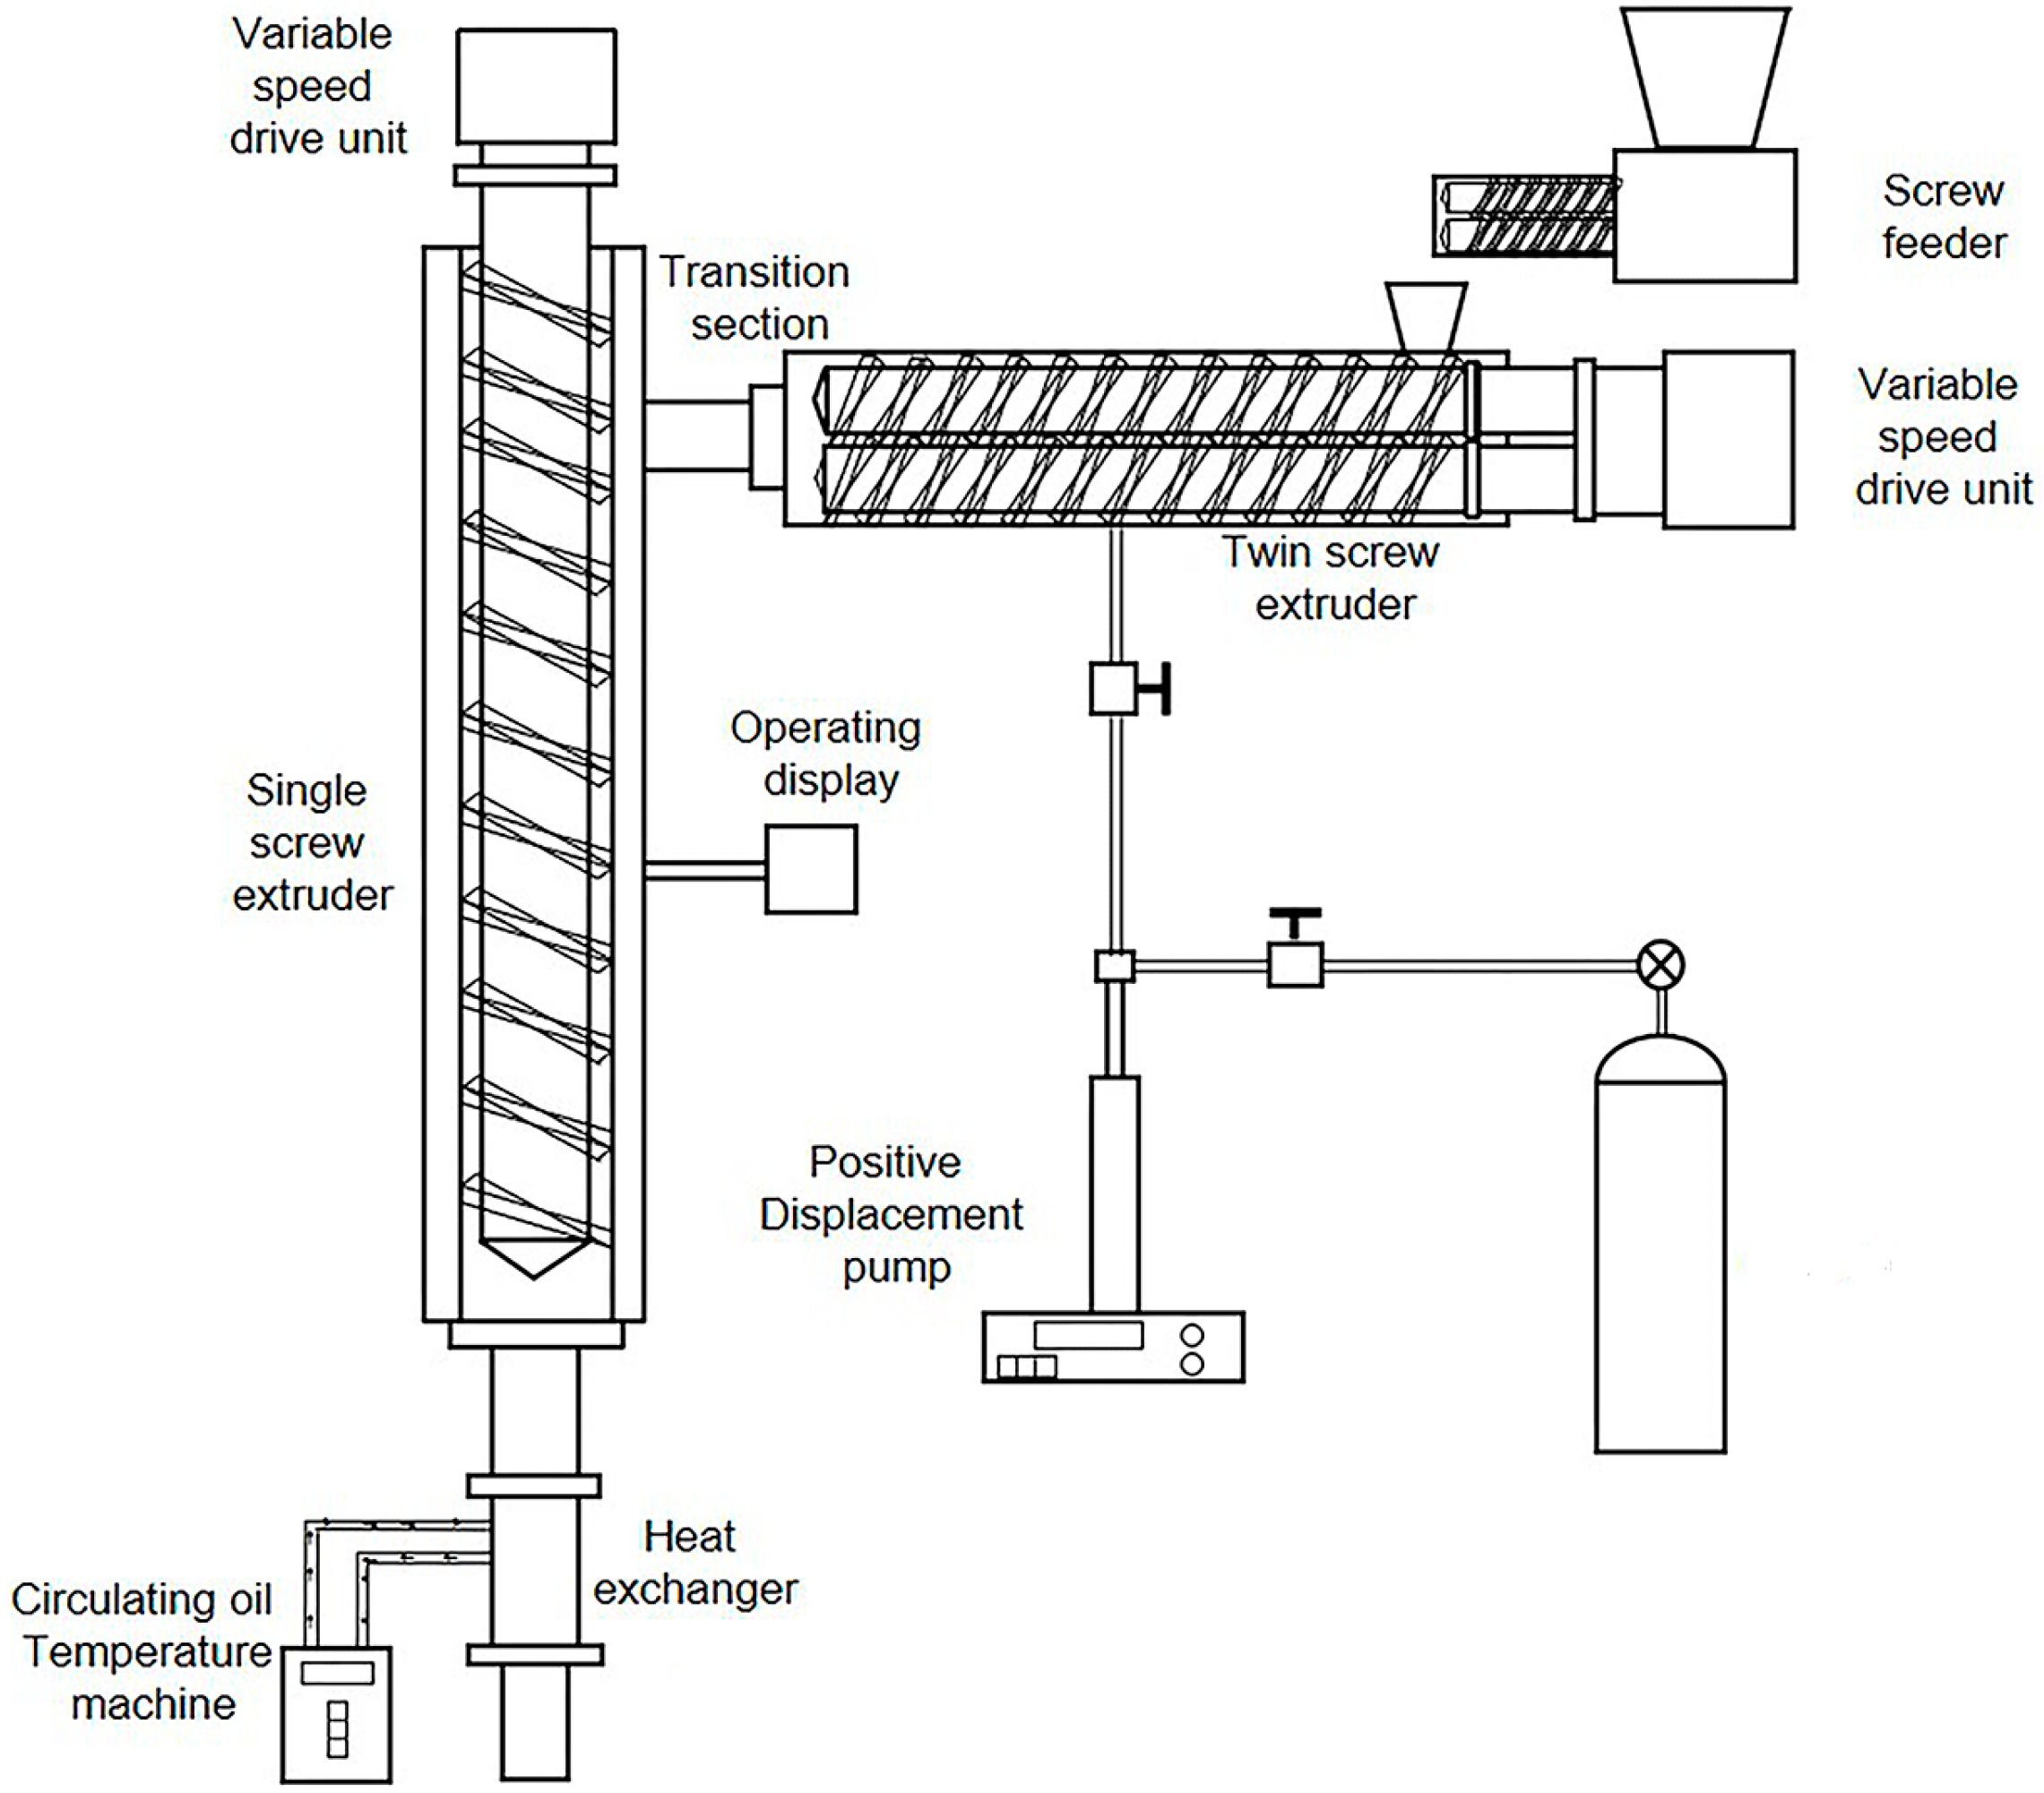 Schematic diagram of a single screw extruder.